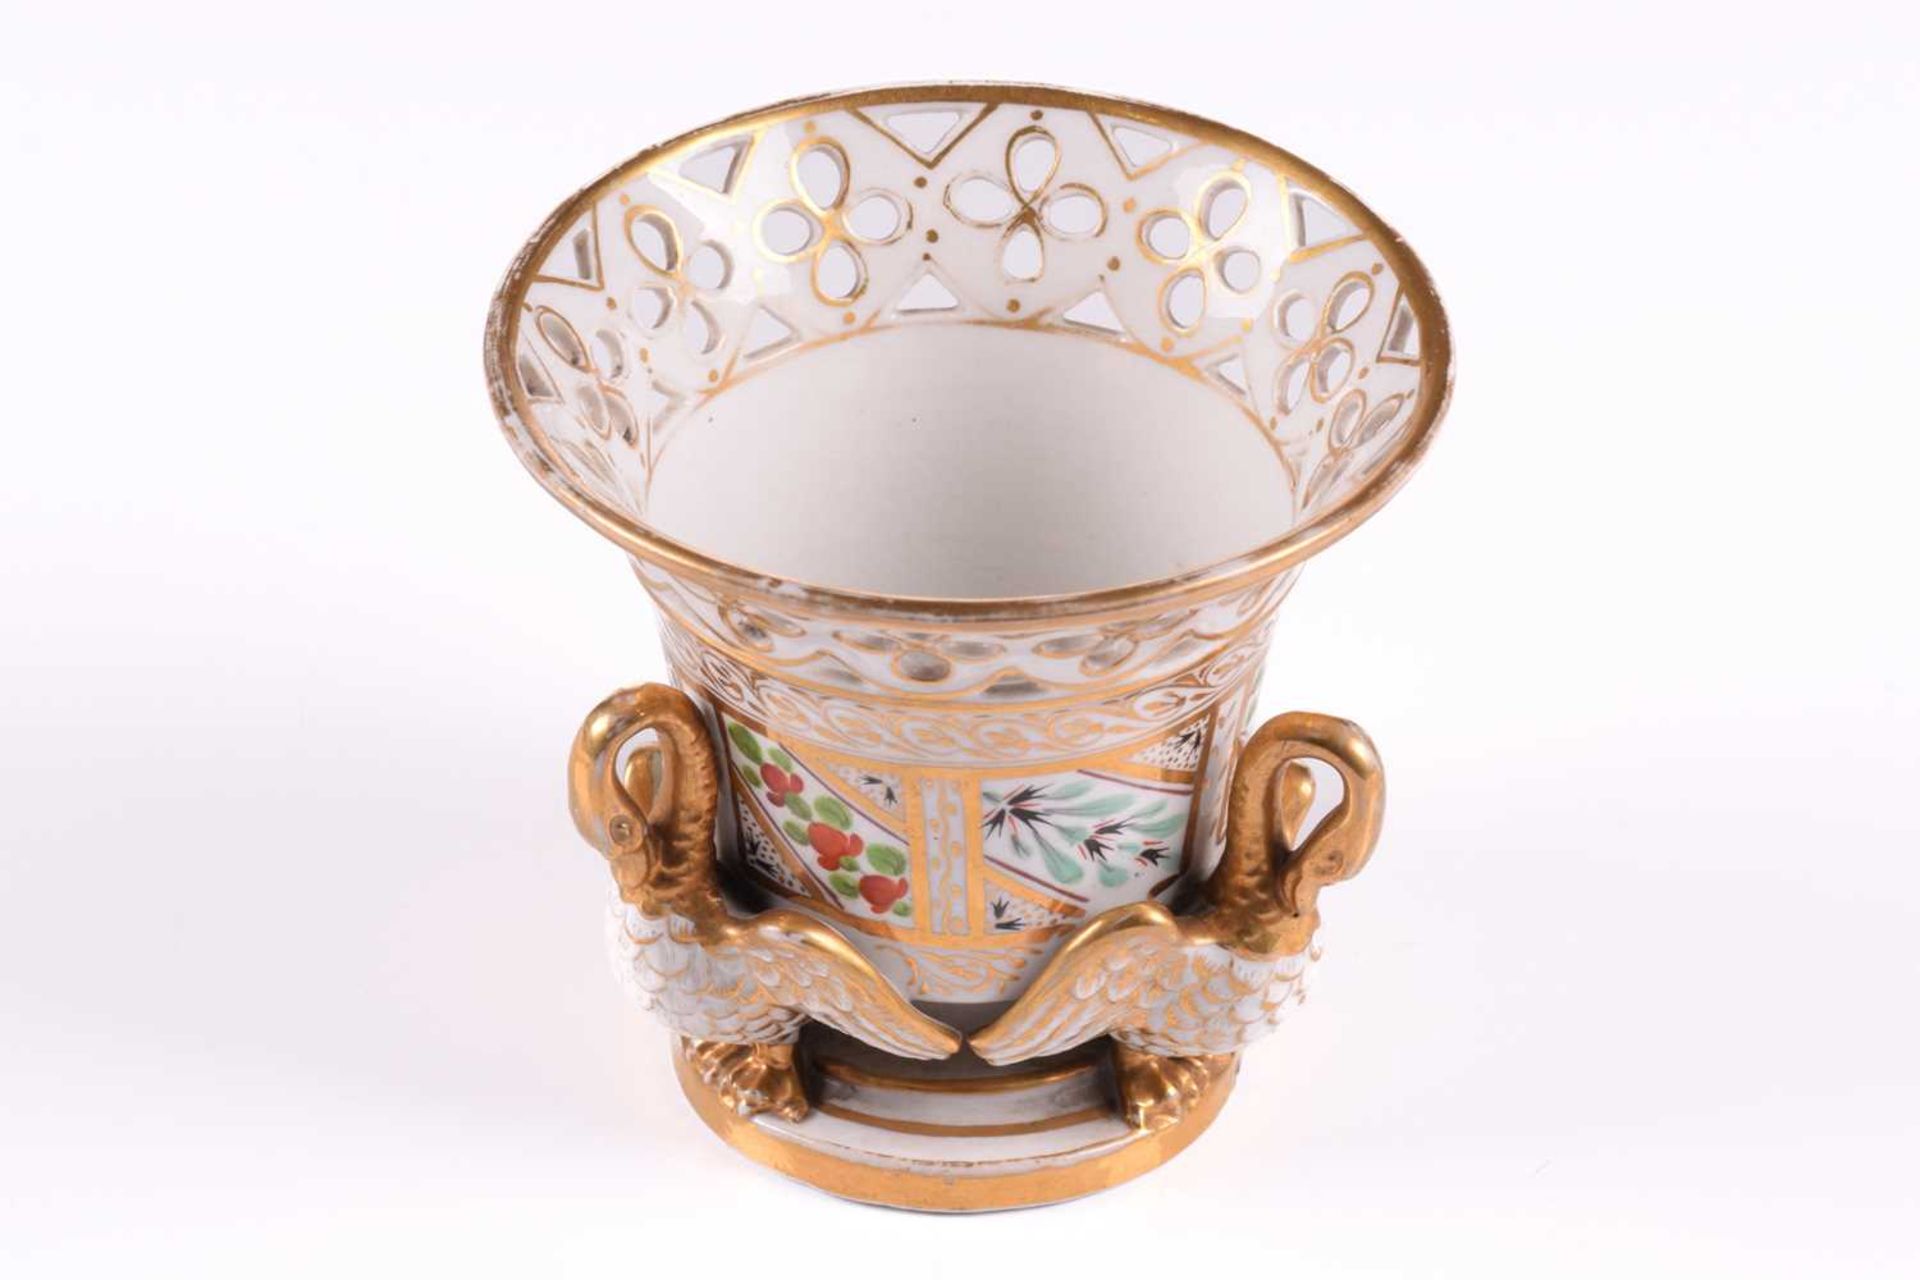 A Vienna bisque porcelain swan sauce boat early 20th century, with a gilded interior, based on an - Image 5 of 21